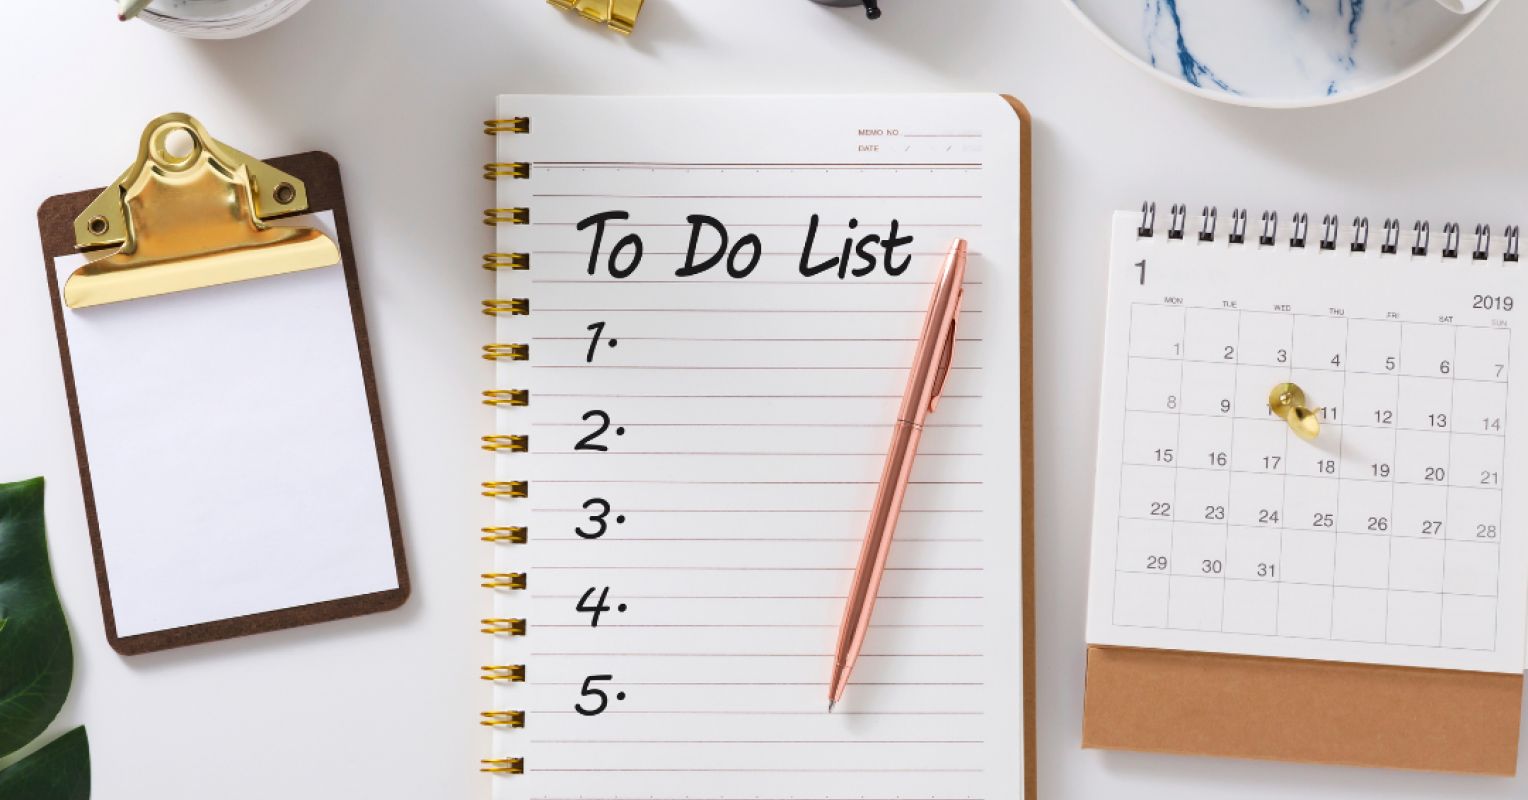 How to Prioritize a Never-Ending To-Do List | Psychology Today